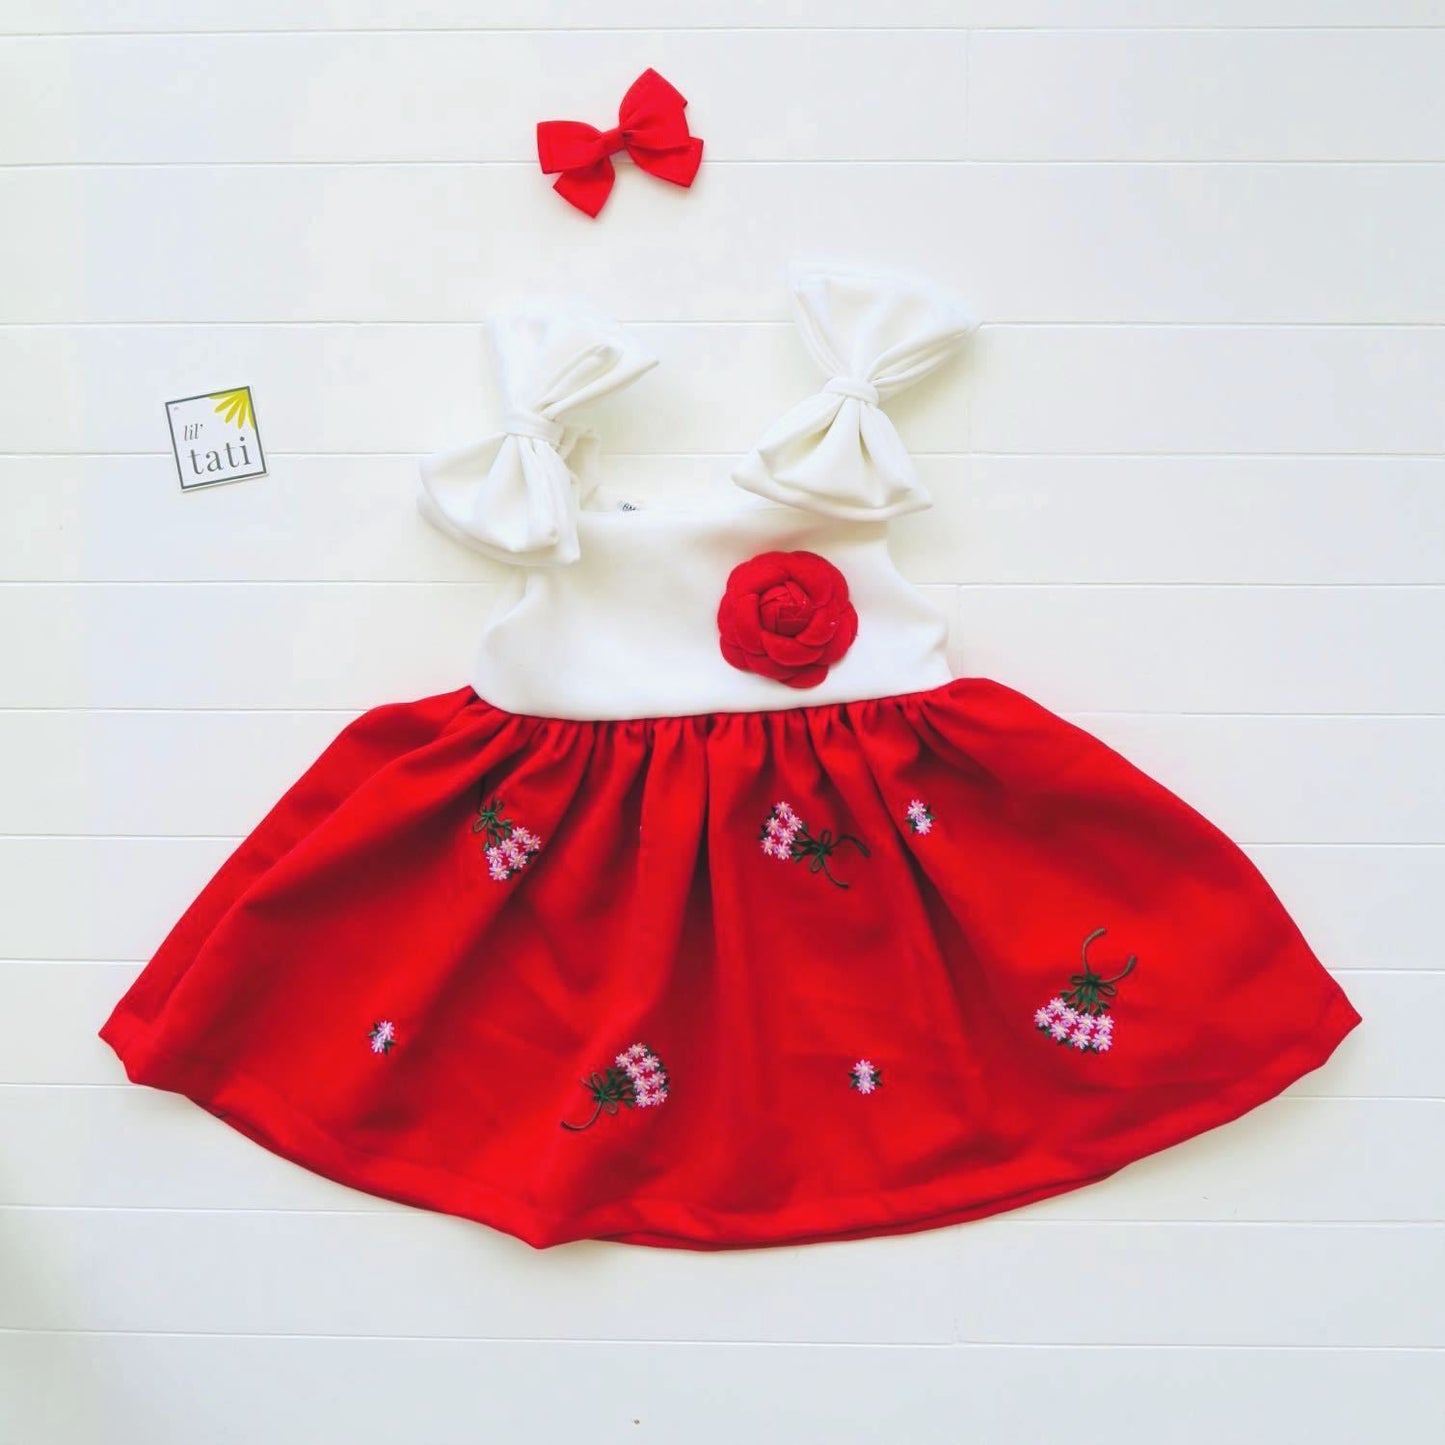 Poppy Ribbon Dress in White Neoprene and Red Embroidery - Lil' Tati